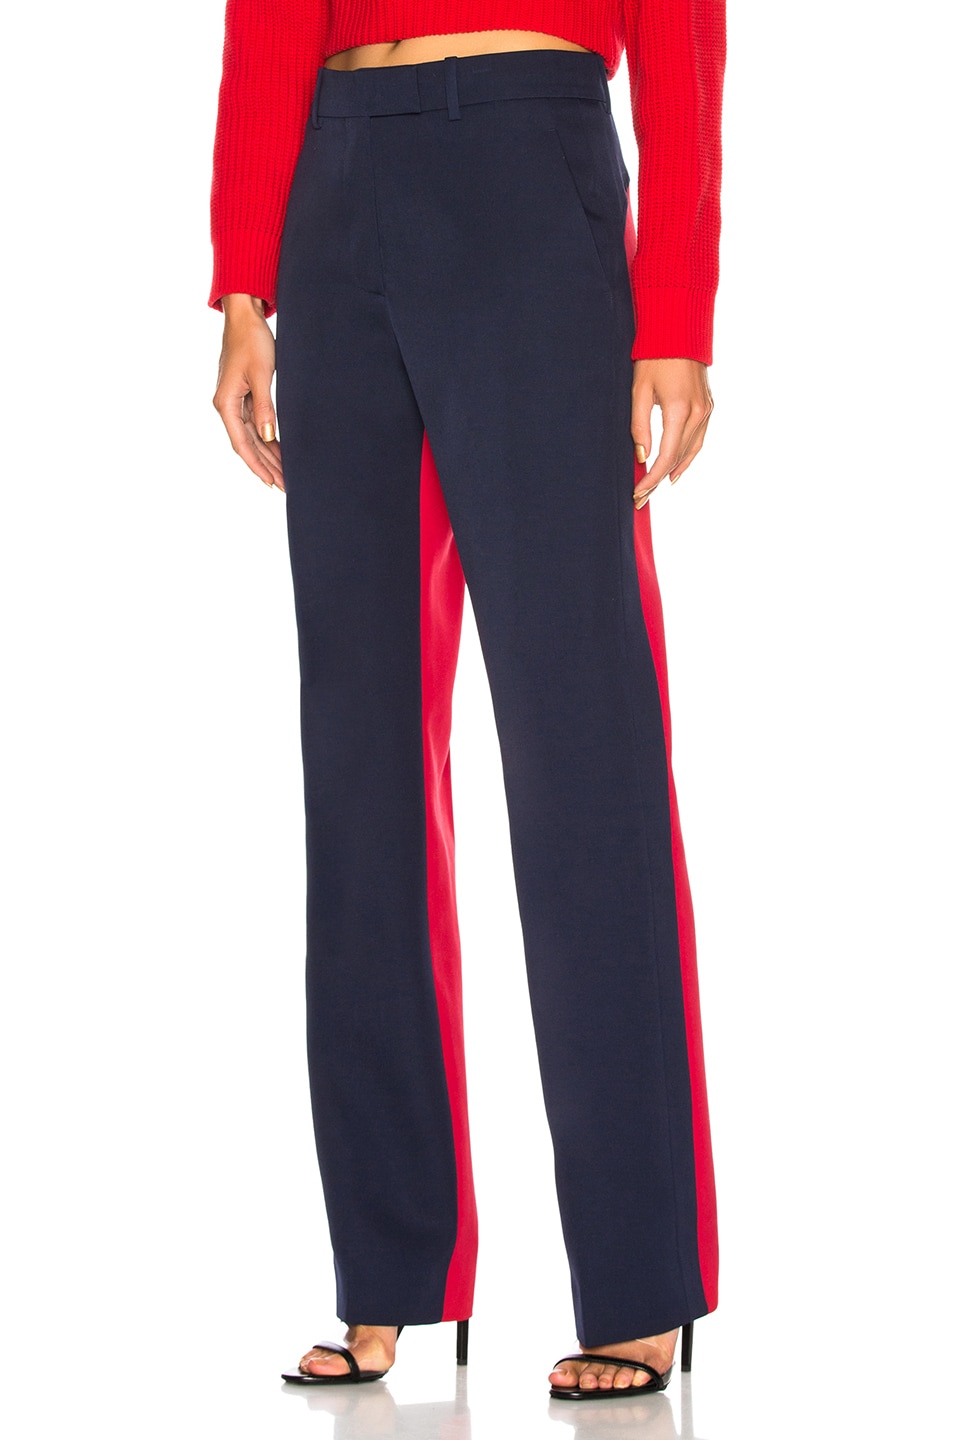 Image 1 of CALVIN KLEIN 205W39NYC Colorblocked Trousers in Navy & Scarlet